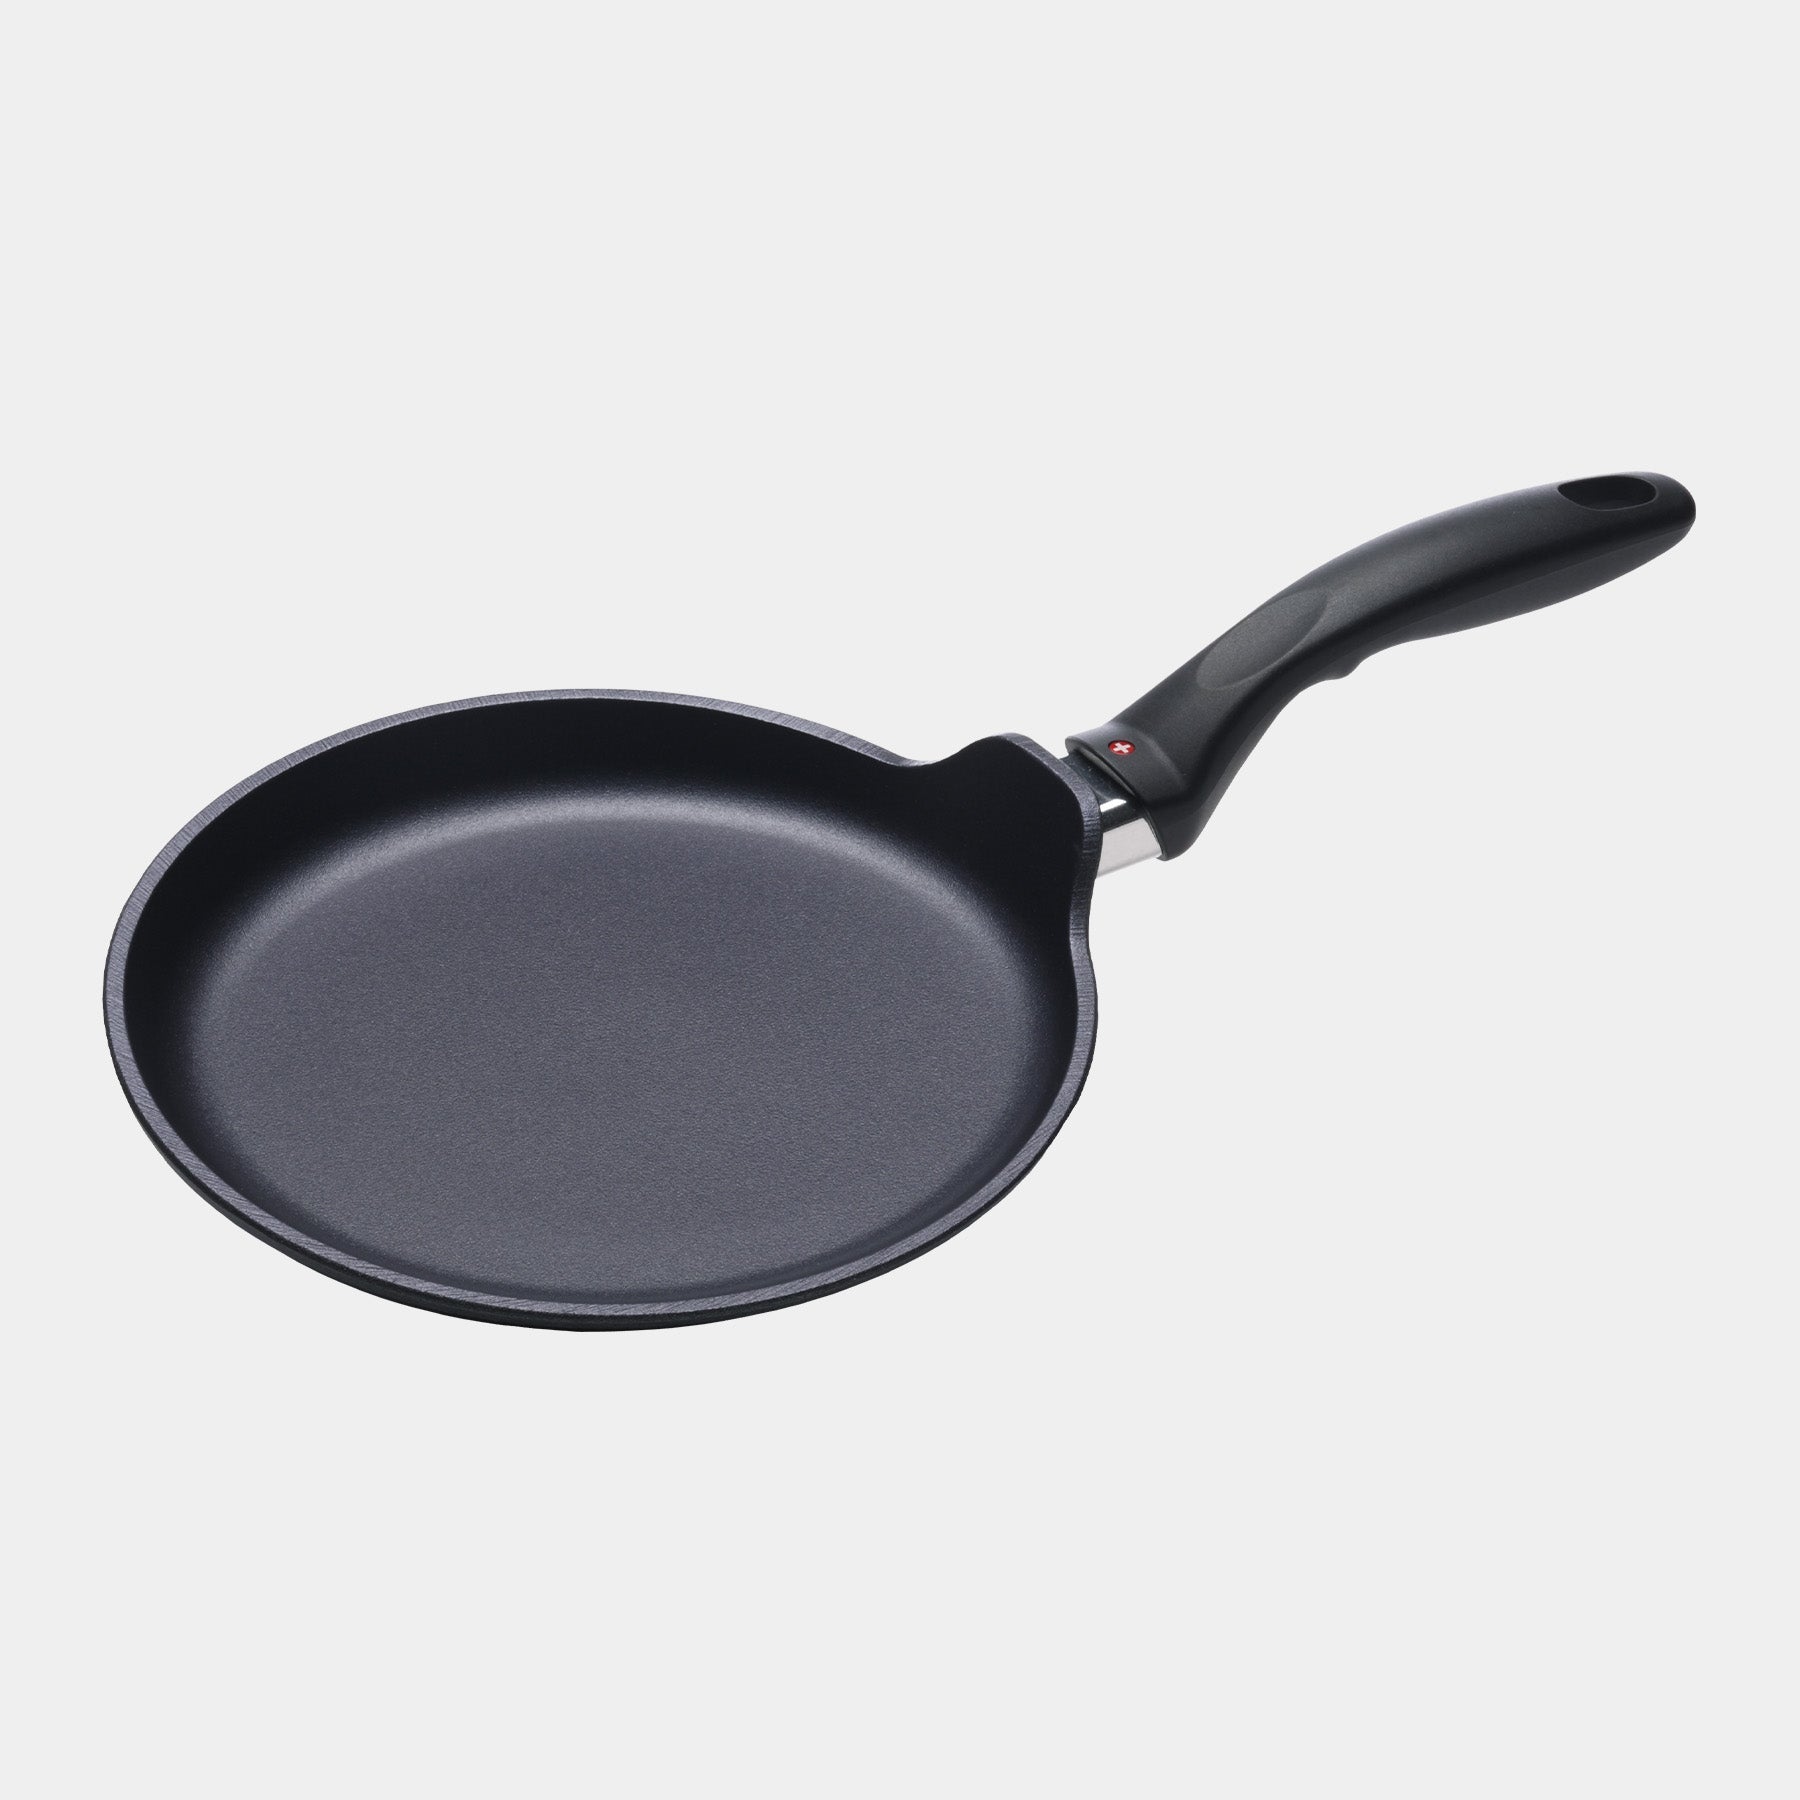 HD Nonstick 9.5" Crepe Pan - Induction